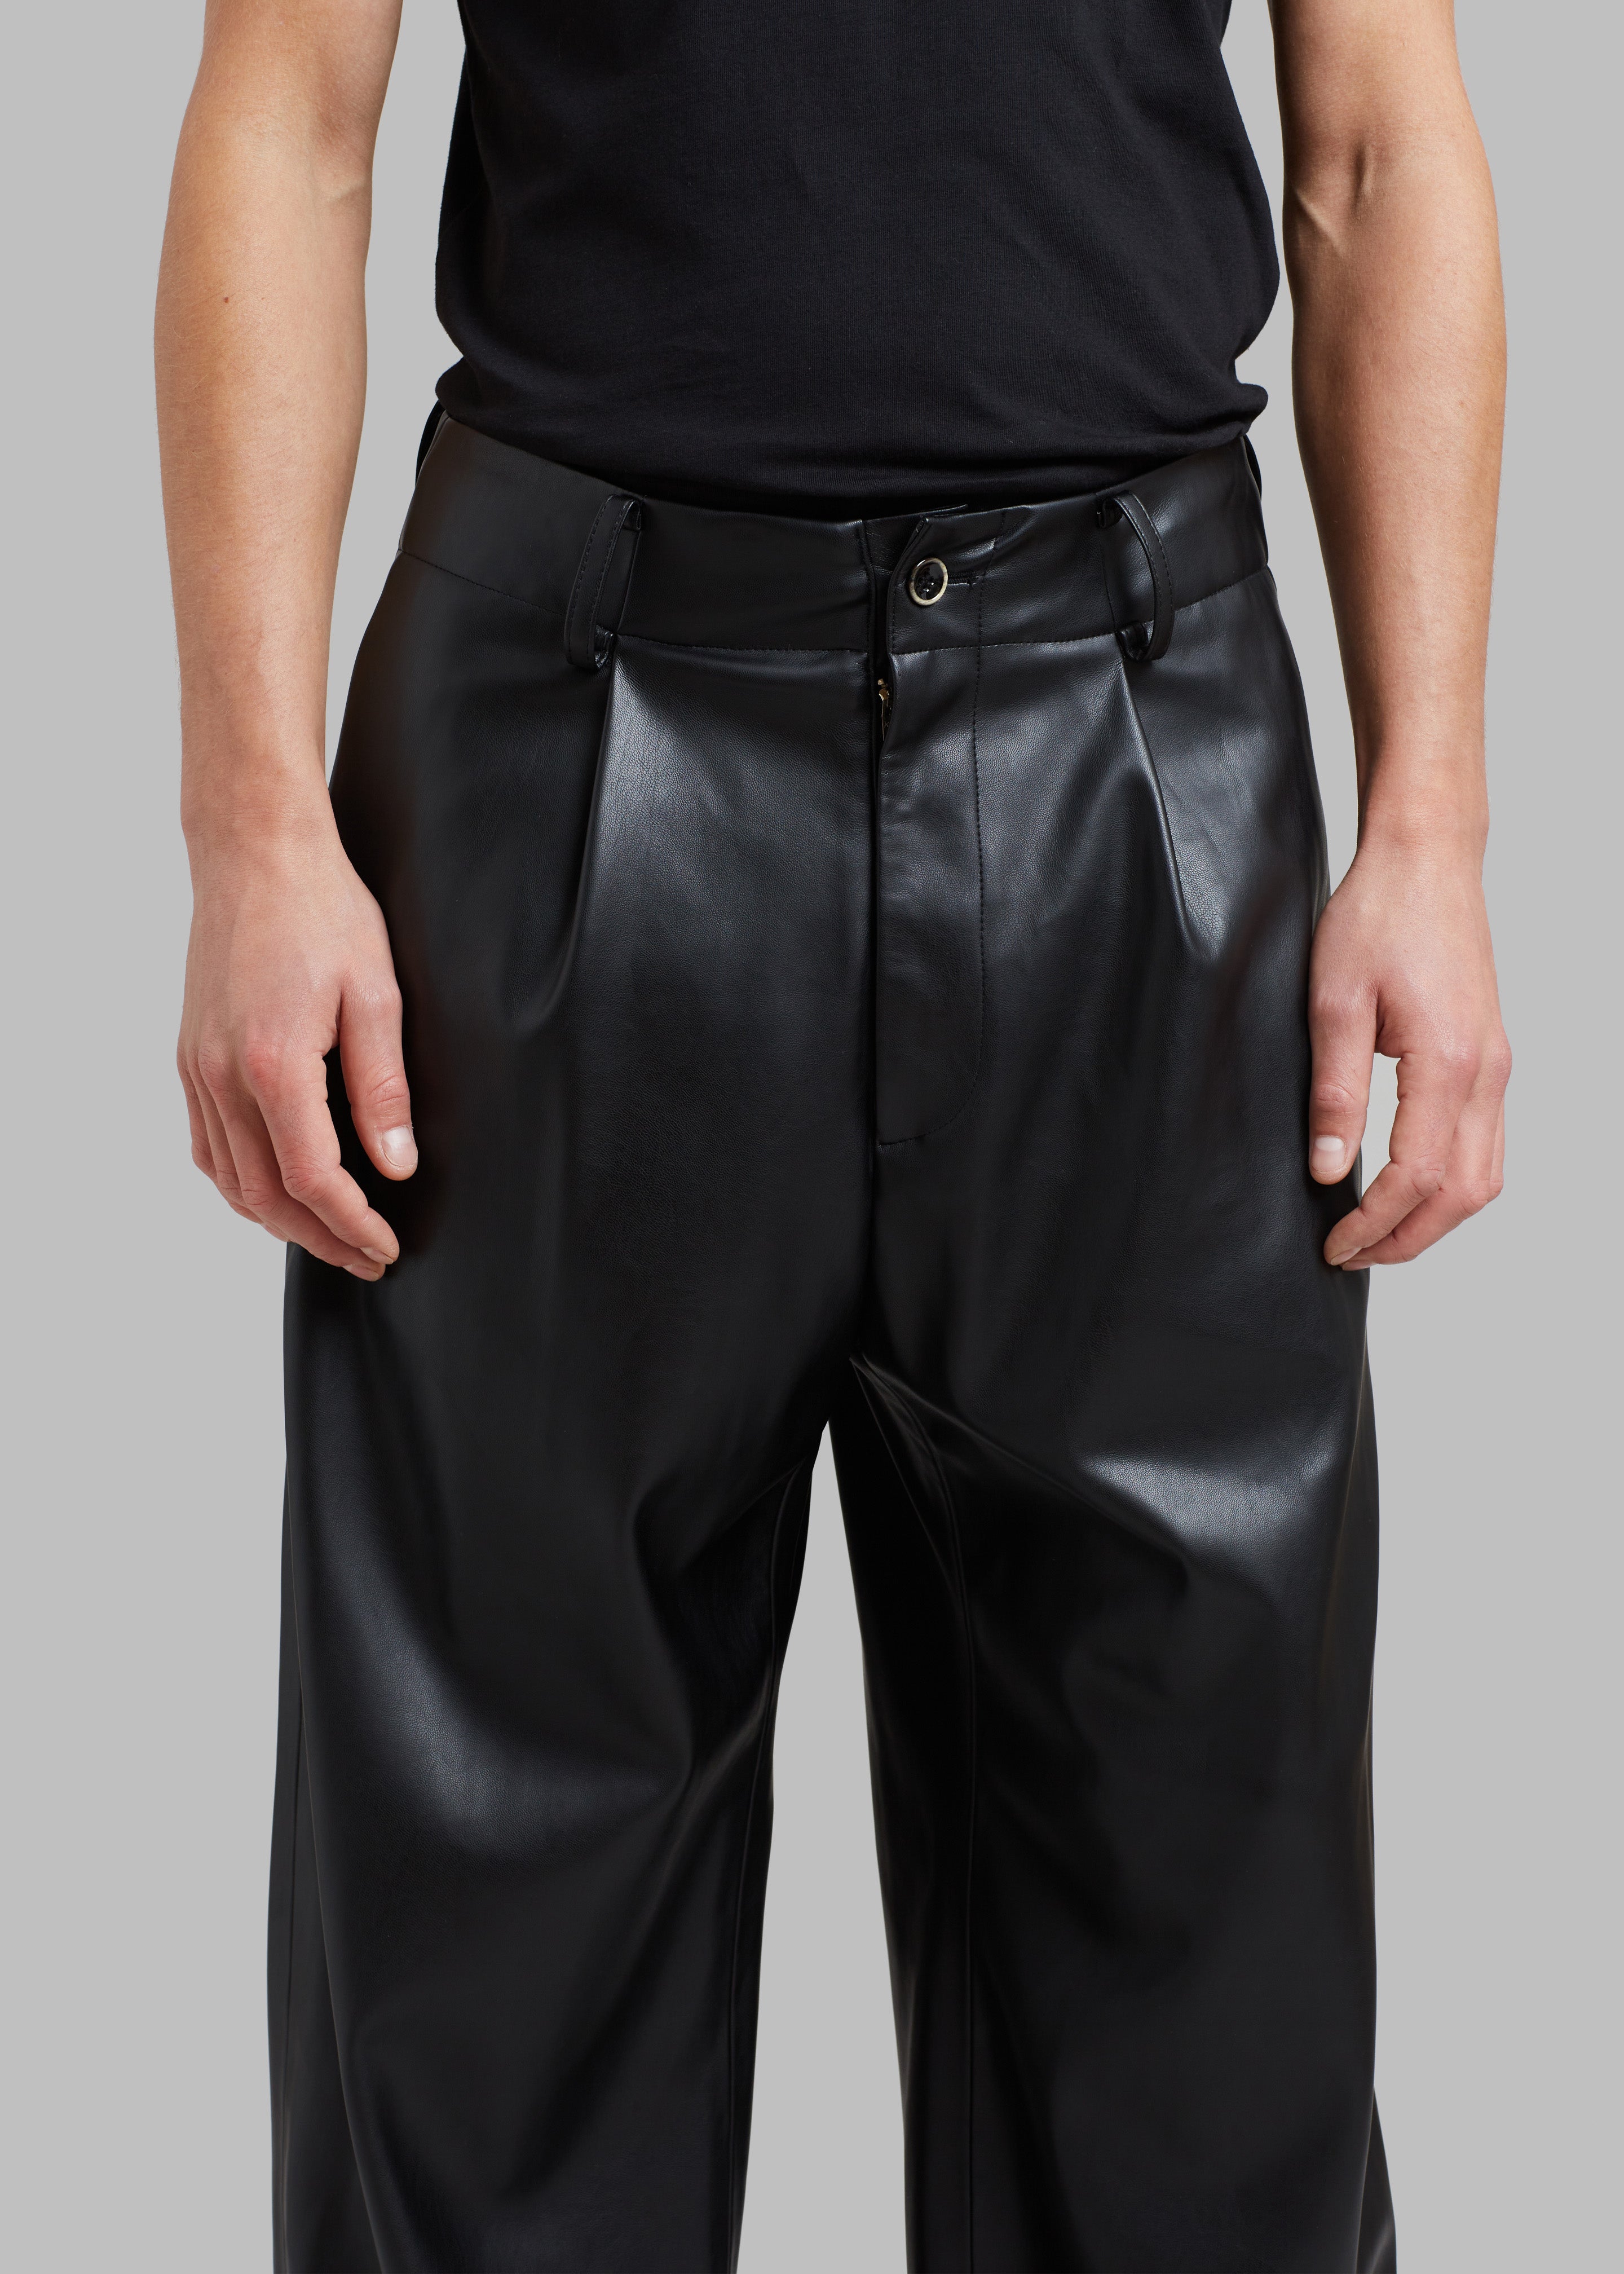 Men's 'easy Strobe' Lamb Leather Pants by Rick Owens | Coltorti Boutique